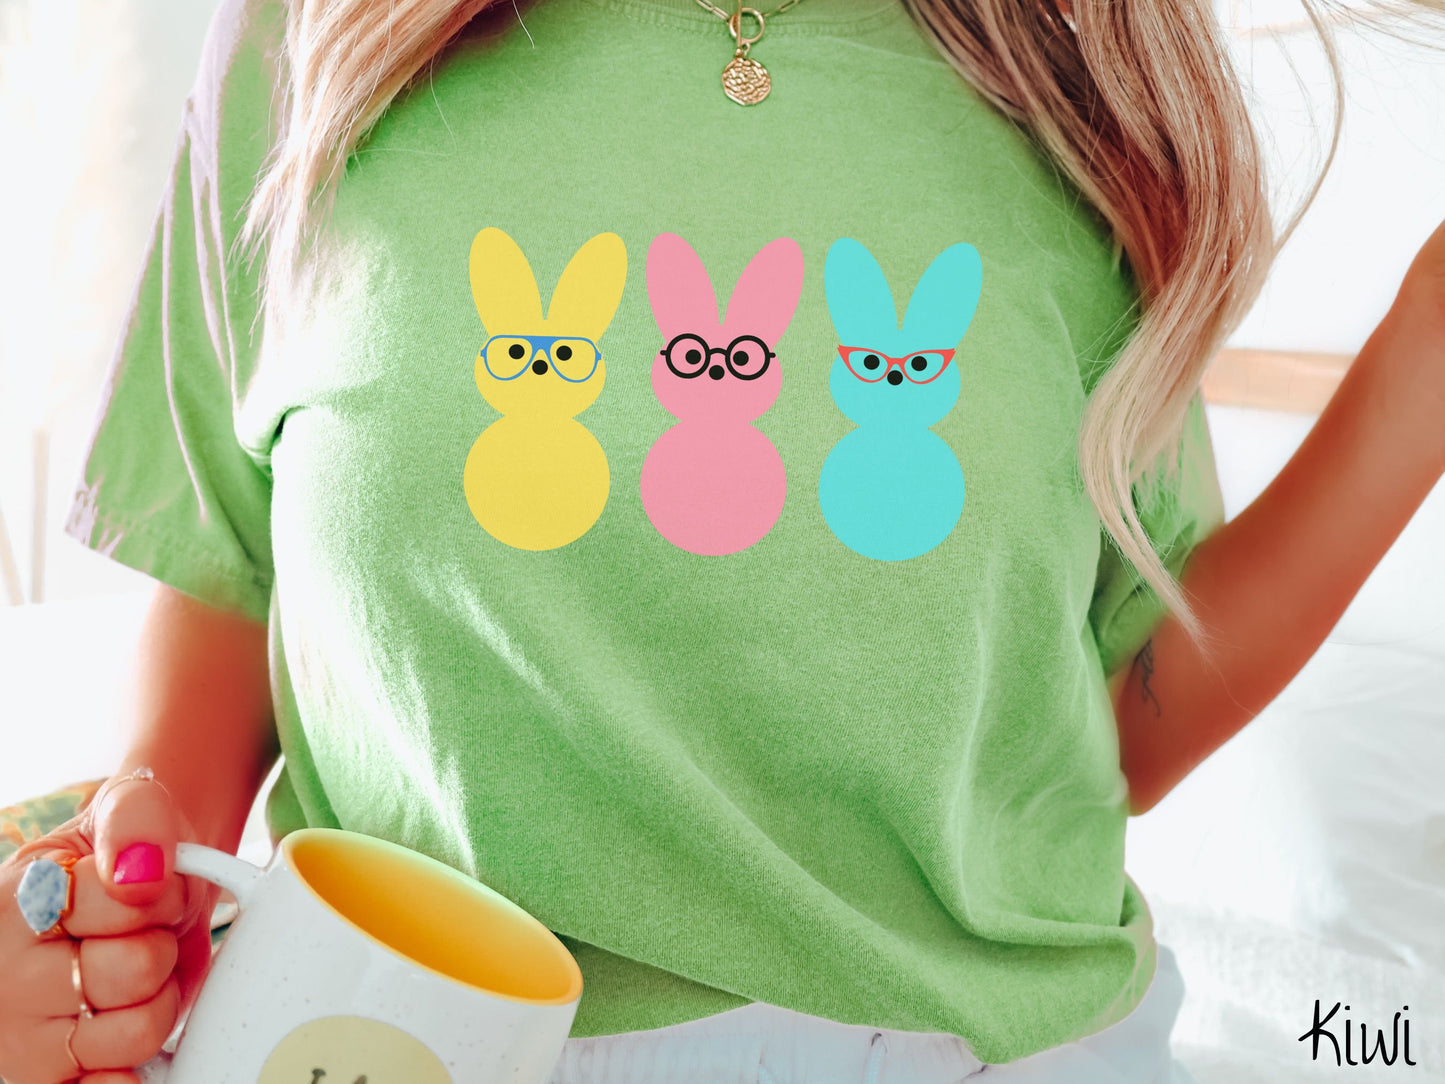 A woman wearing a cute, vintage kiwi colored shirt with three peep-like rabbits on the front. One is yellow and wearing blue glasses, the middle is pink with black glasses, and the one on the right is light blue with red glasses.